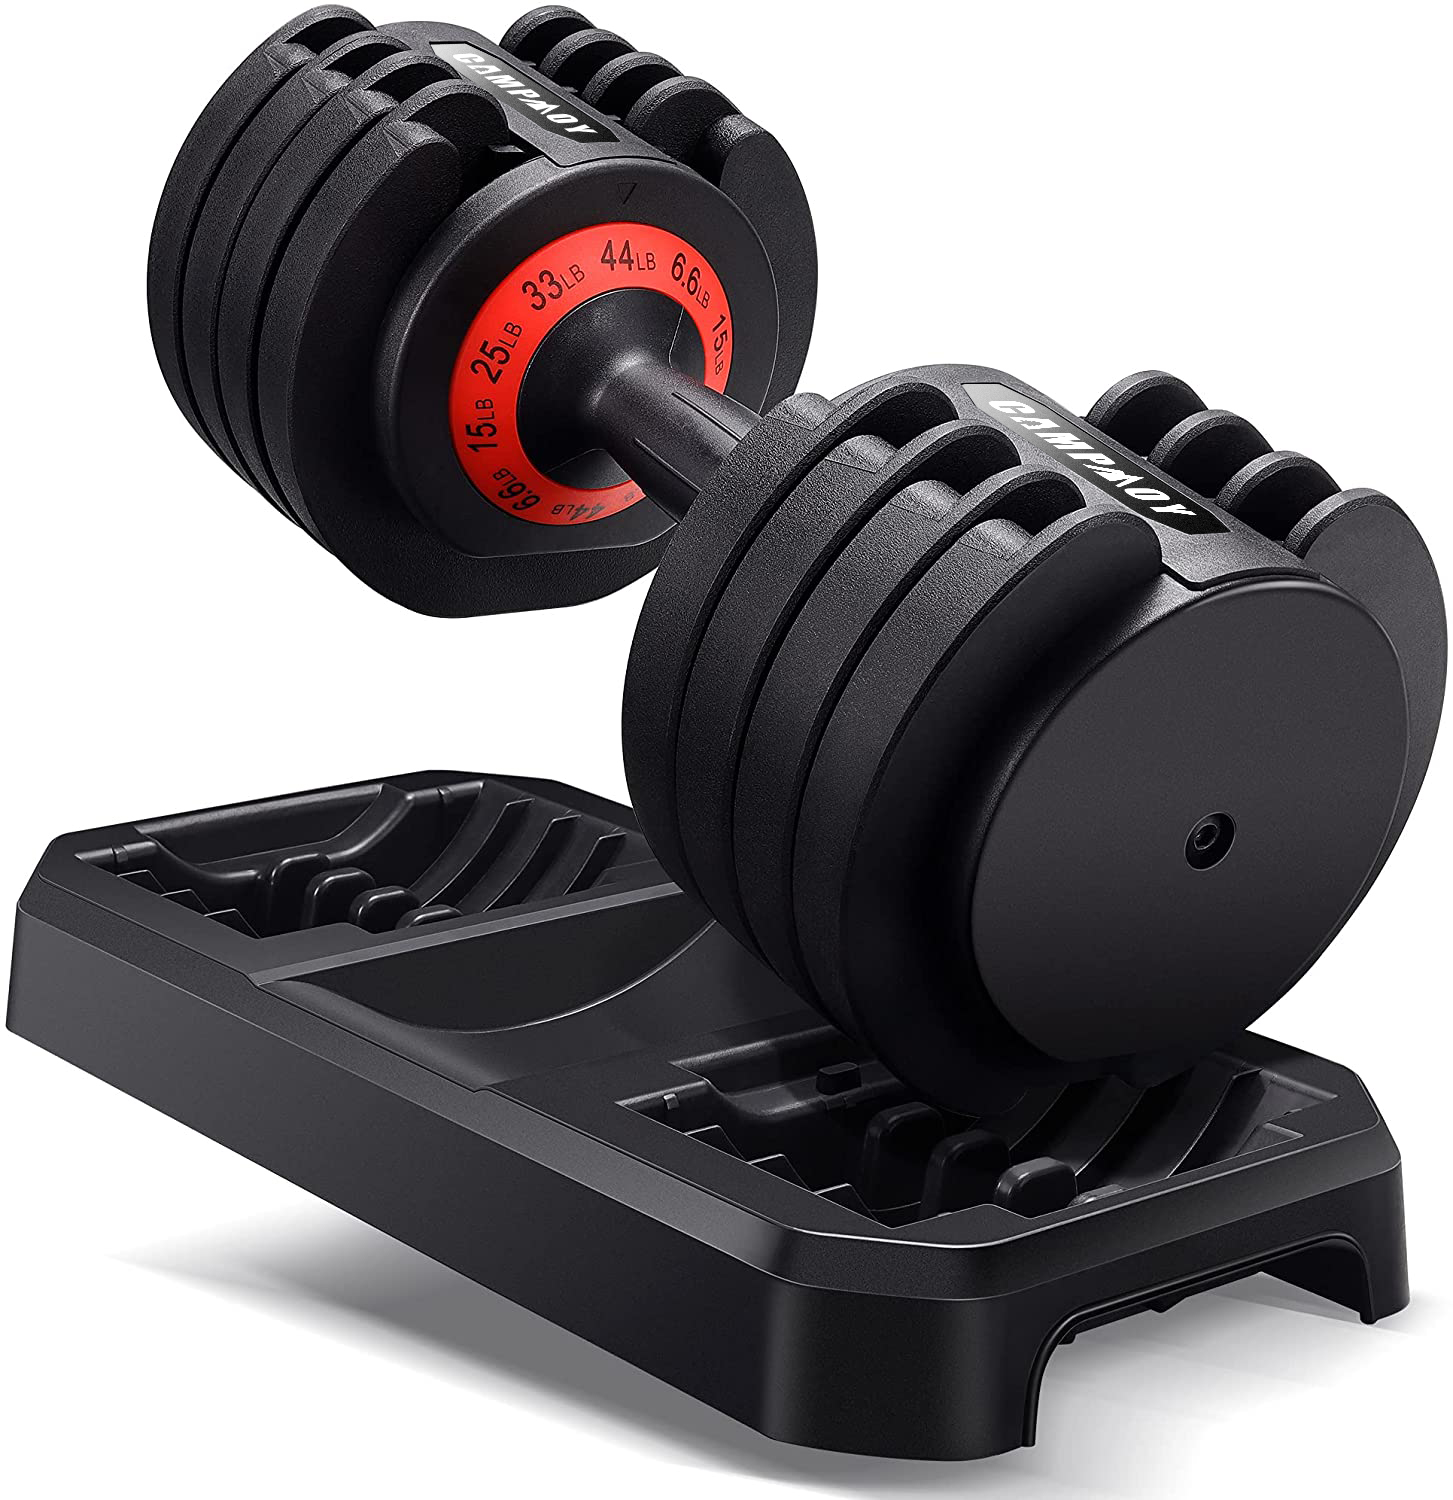 Campmoy Adjustable Dumbbell 6.6-44 lbs Single Weight Dumbbell with Anti-Slip Metal Handle Extra Safe Lock System for Full Body Workout Home Gym Men/Women - image 1 of 8